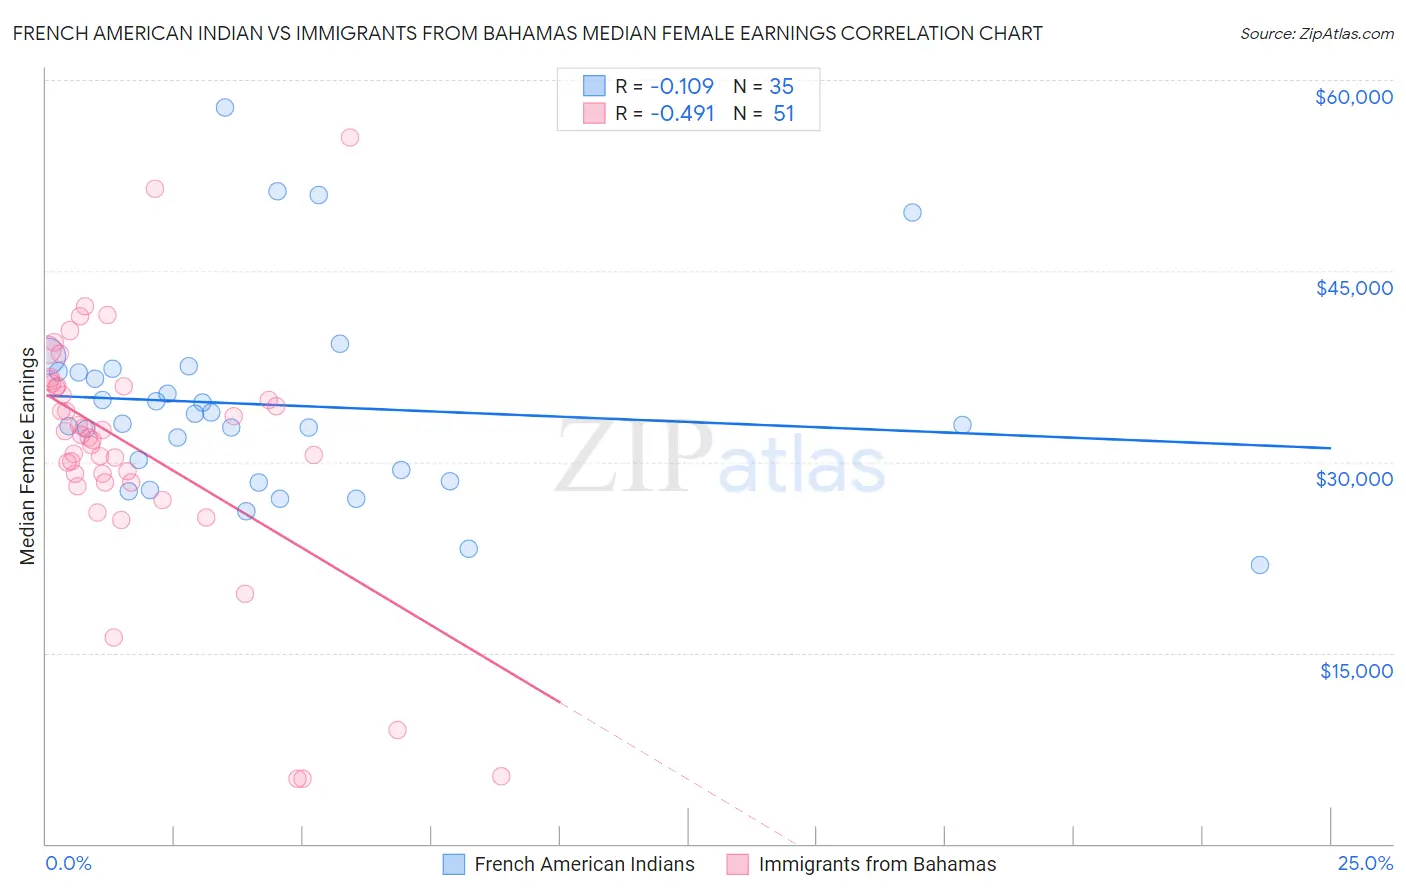 French American Indian vs Immigrants from Bahamas Median Female Earnings